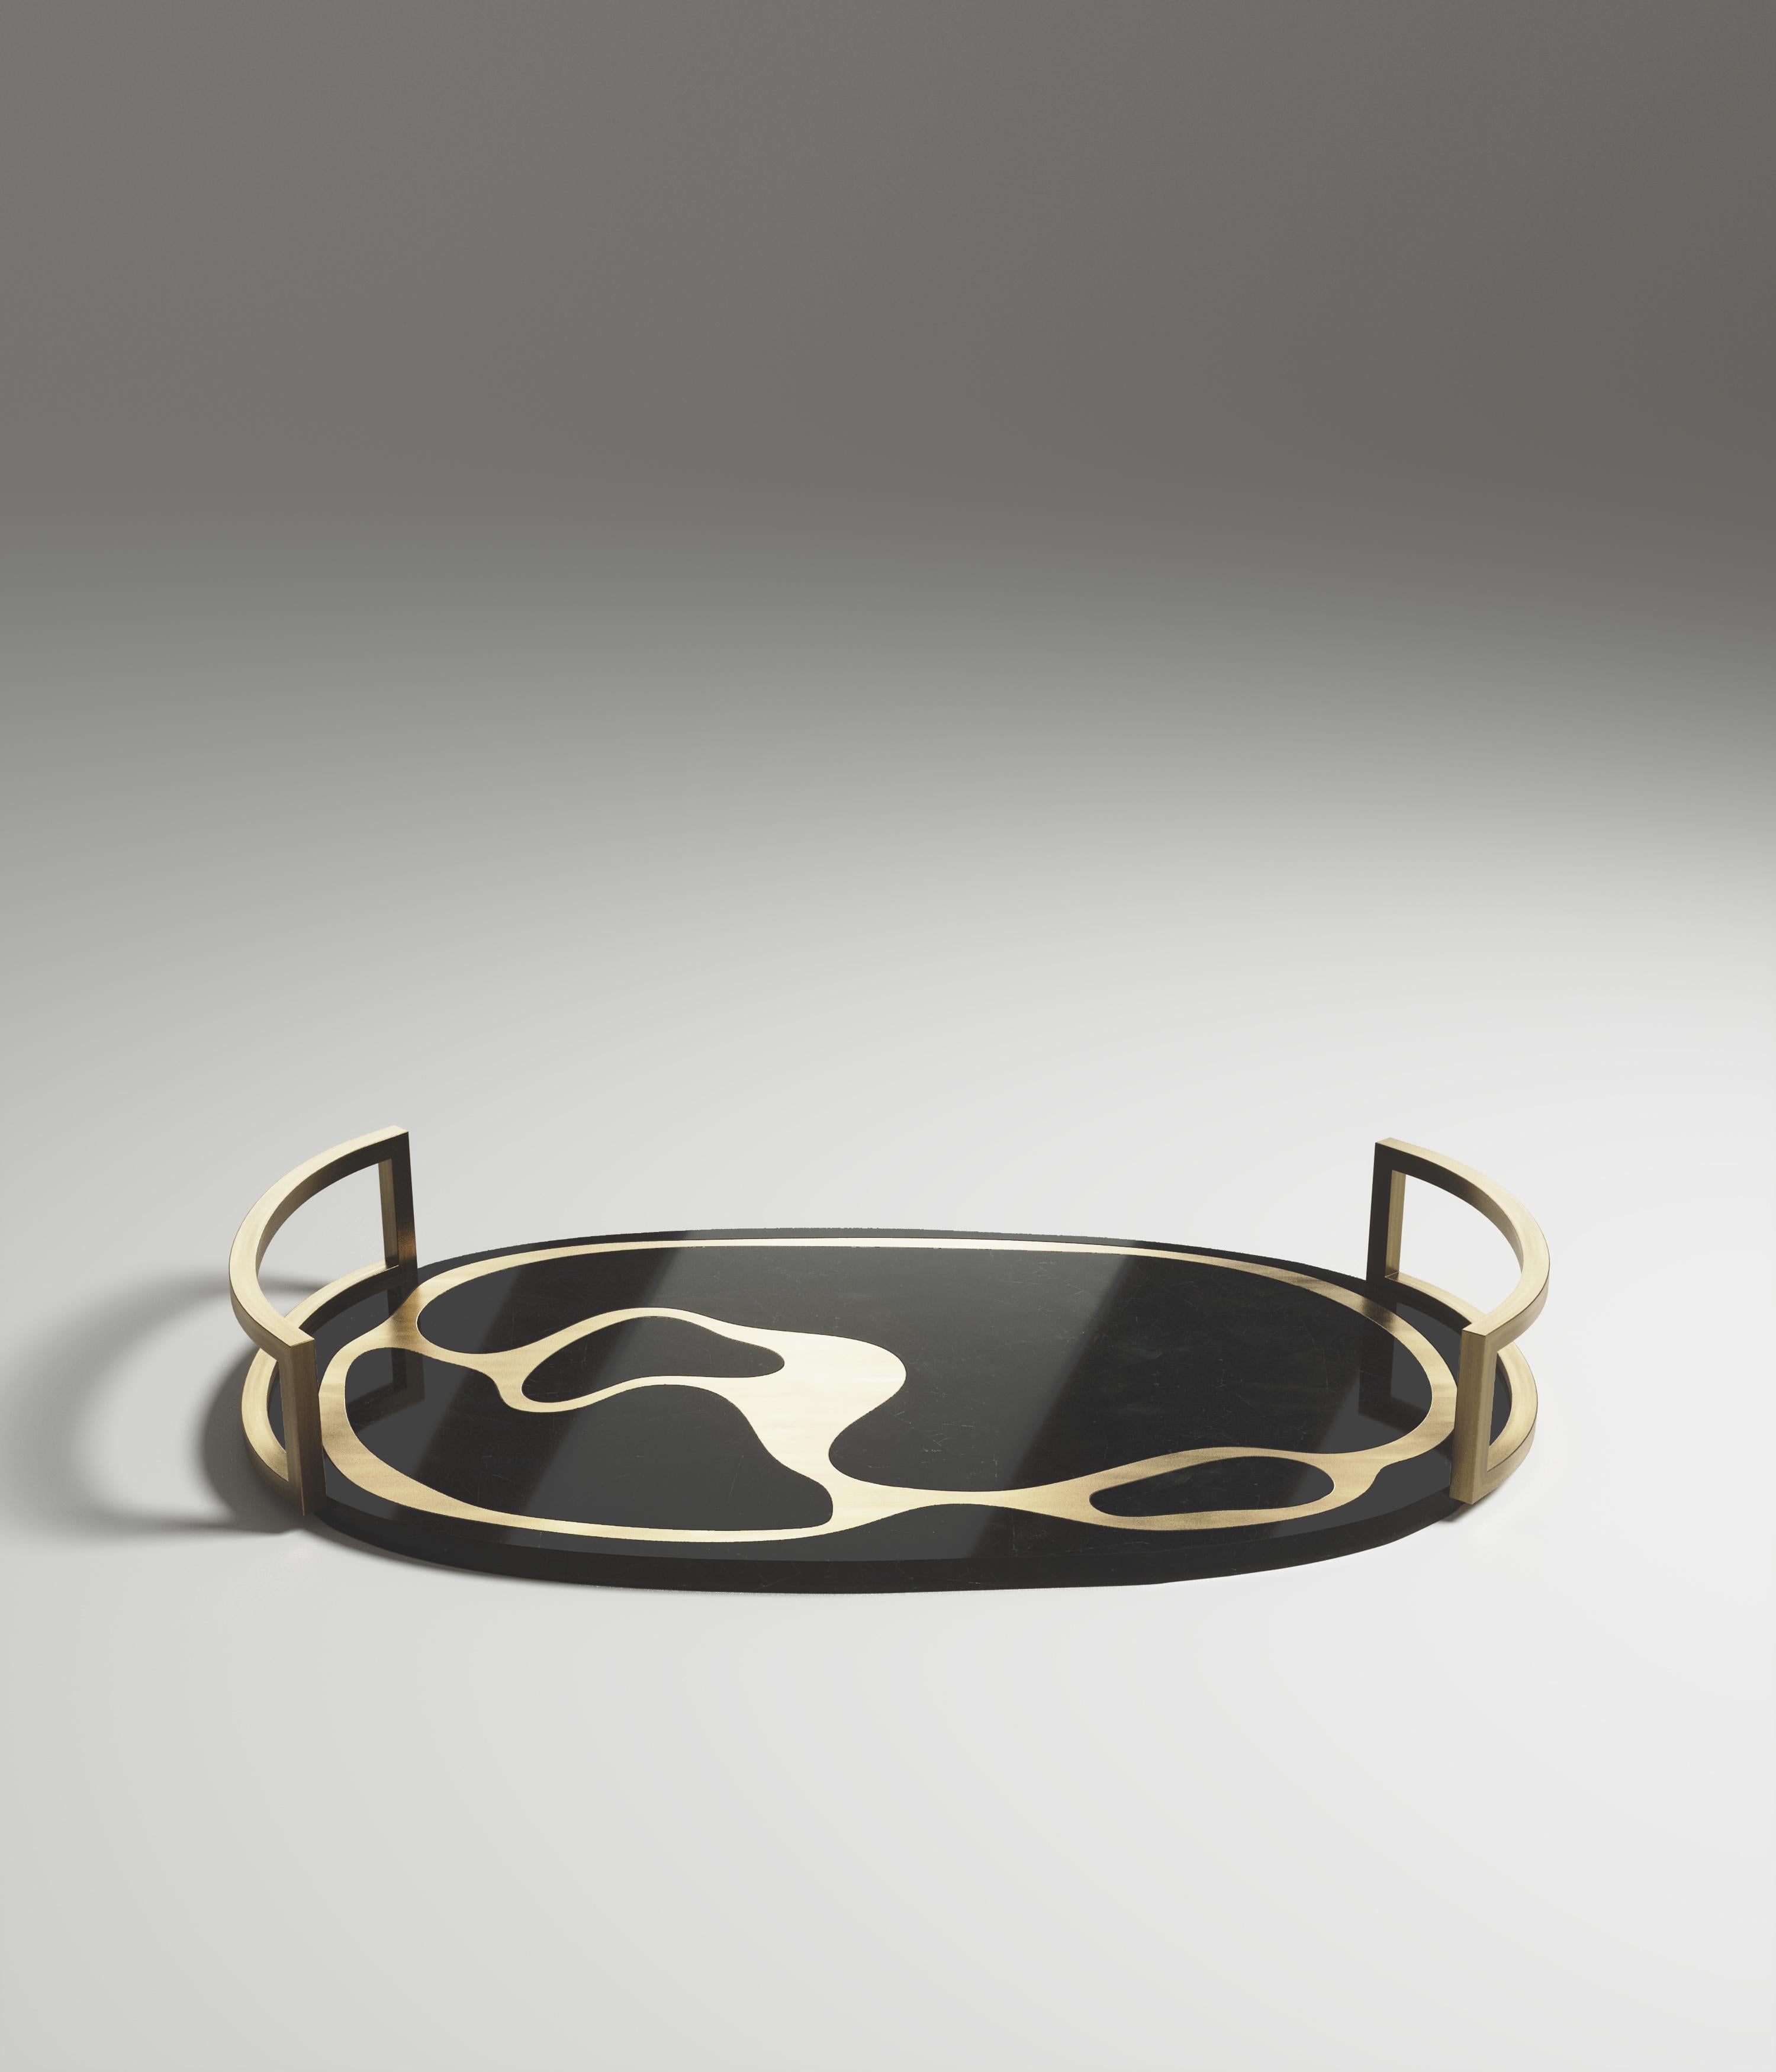 The Mask Oval Tray by Kifu Paris is a versatile and organic piece. The amorphous top and base are inlaid in a mixture of black shell and bronze-patina brass. This piece is designed by Kifu Augousti the daughter of Ria and Yiouri Augousti. 

All Kifu